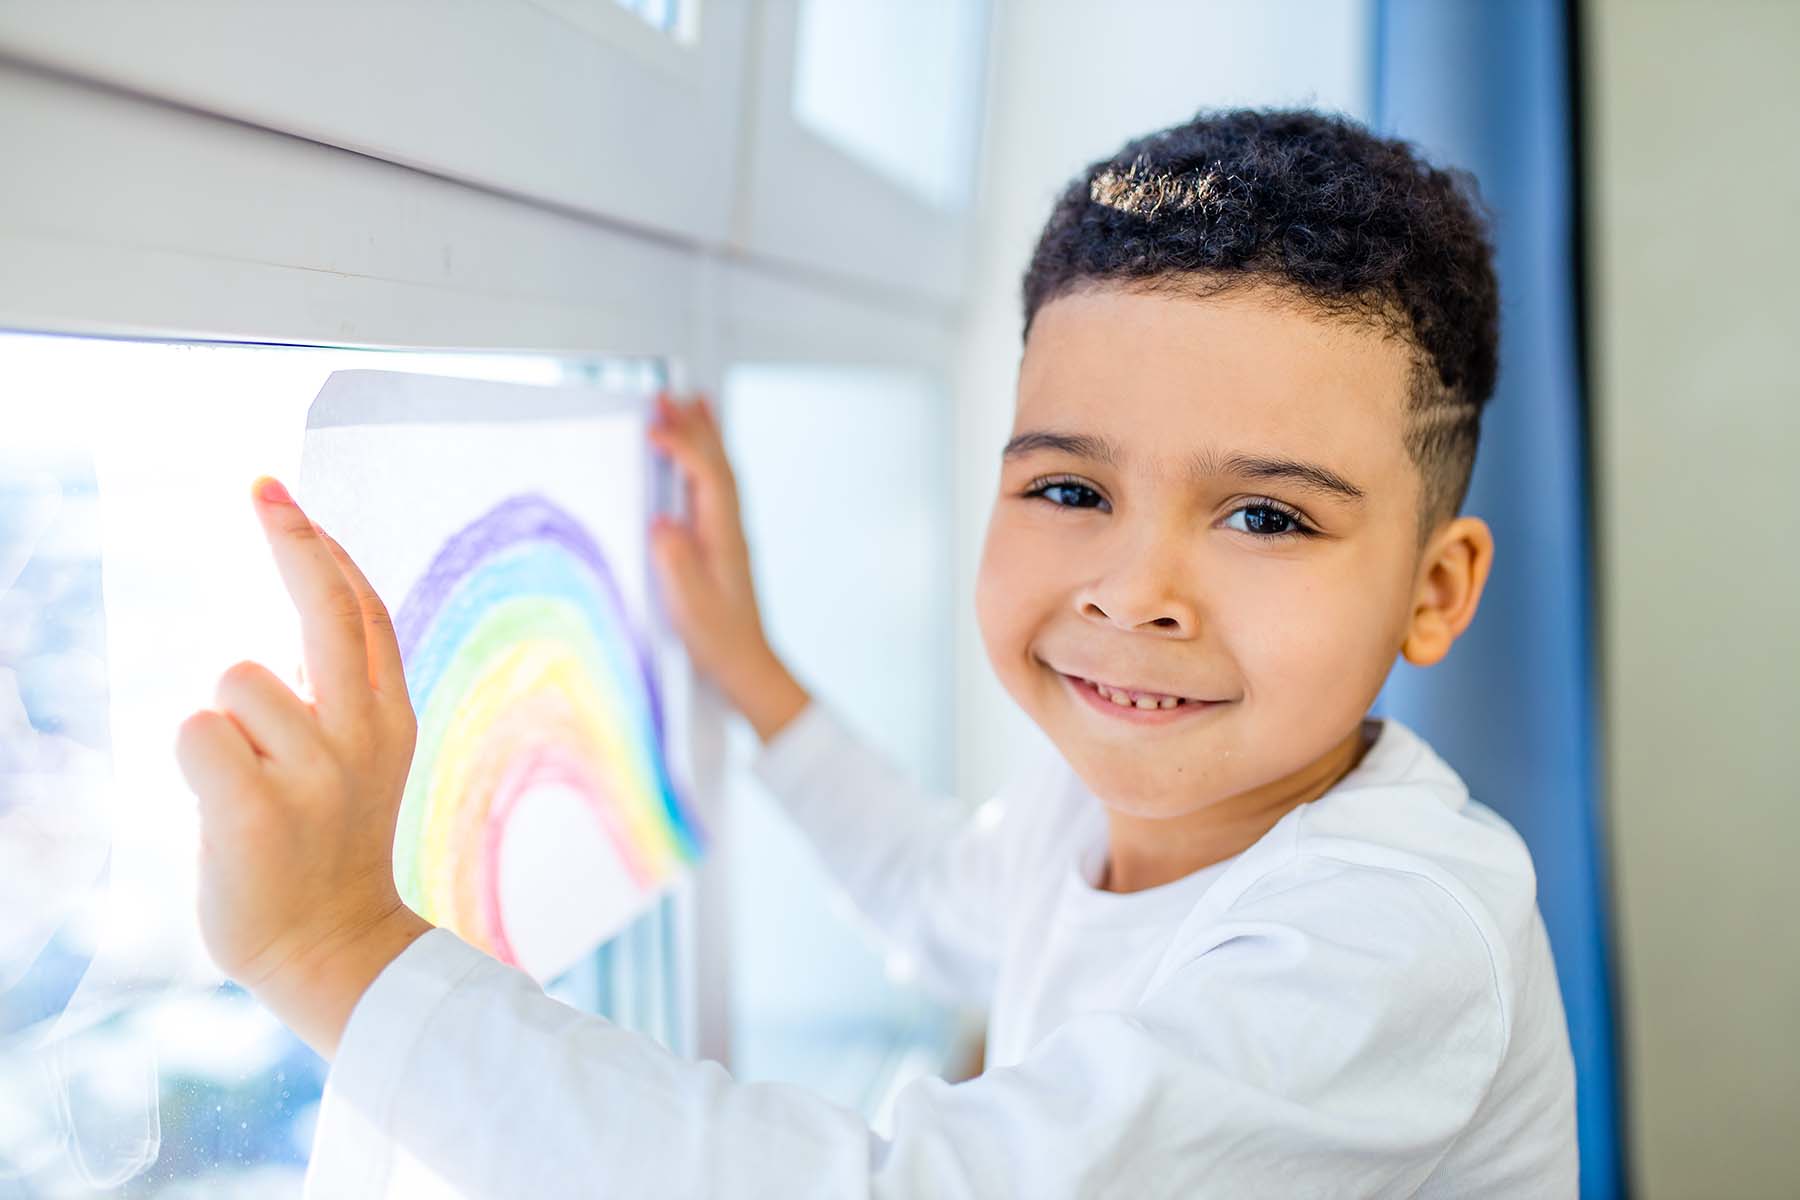 A young child holds his rainbow drawing to the window as he smiles